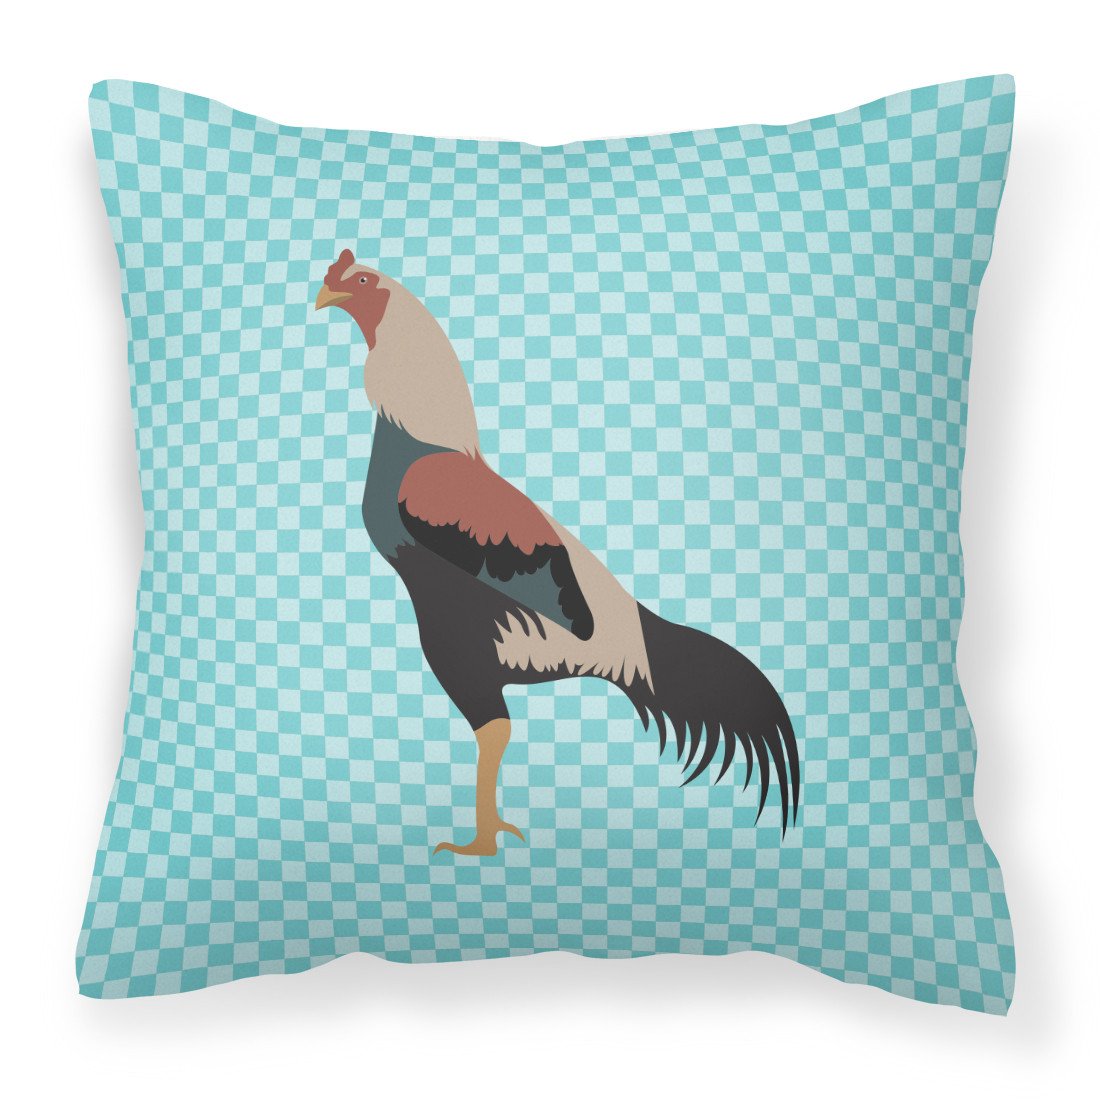 Kulang Chicken Blue Check Fabric Decorative Pillow BB8012PW1818 by Caroline's Treasures